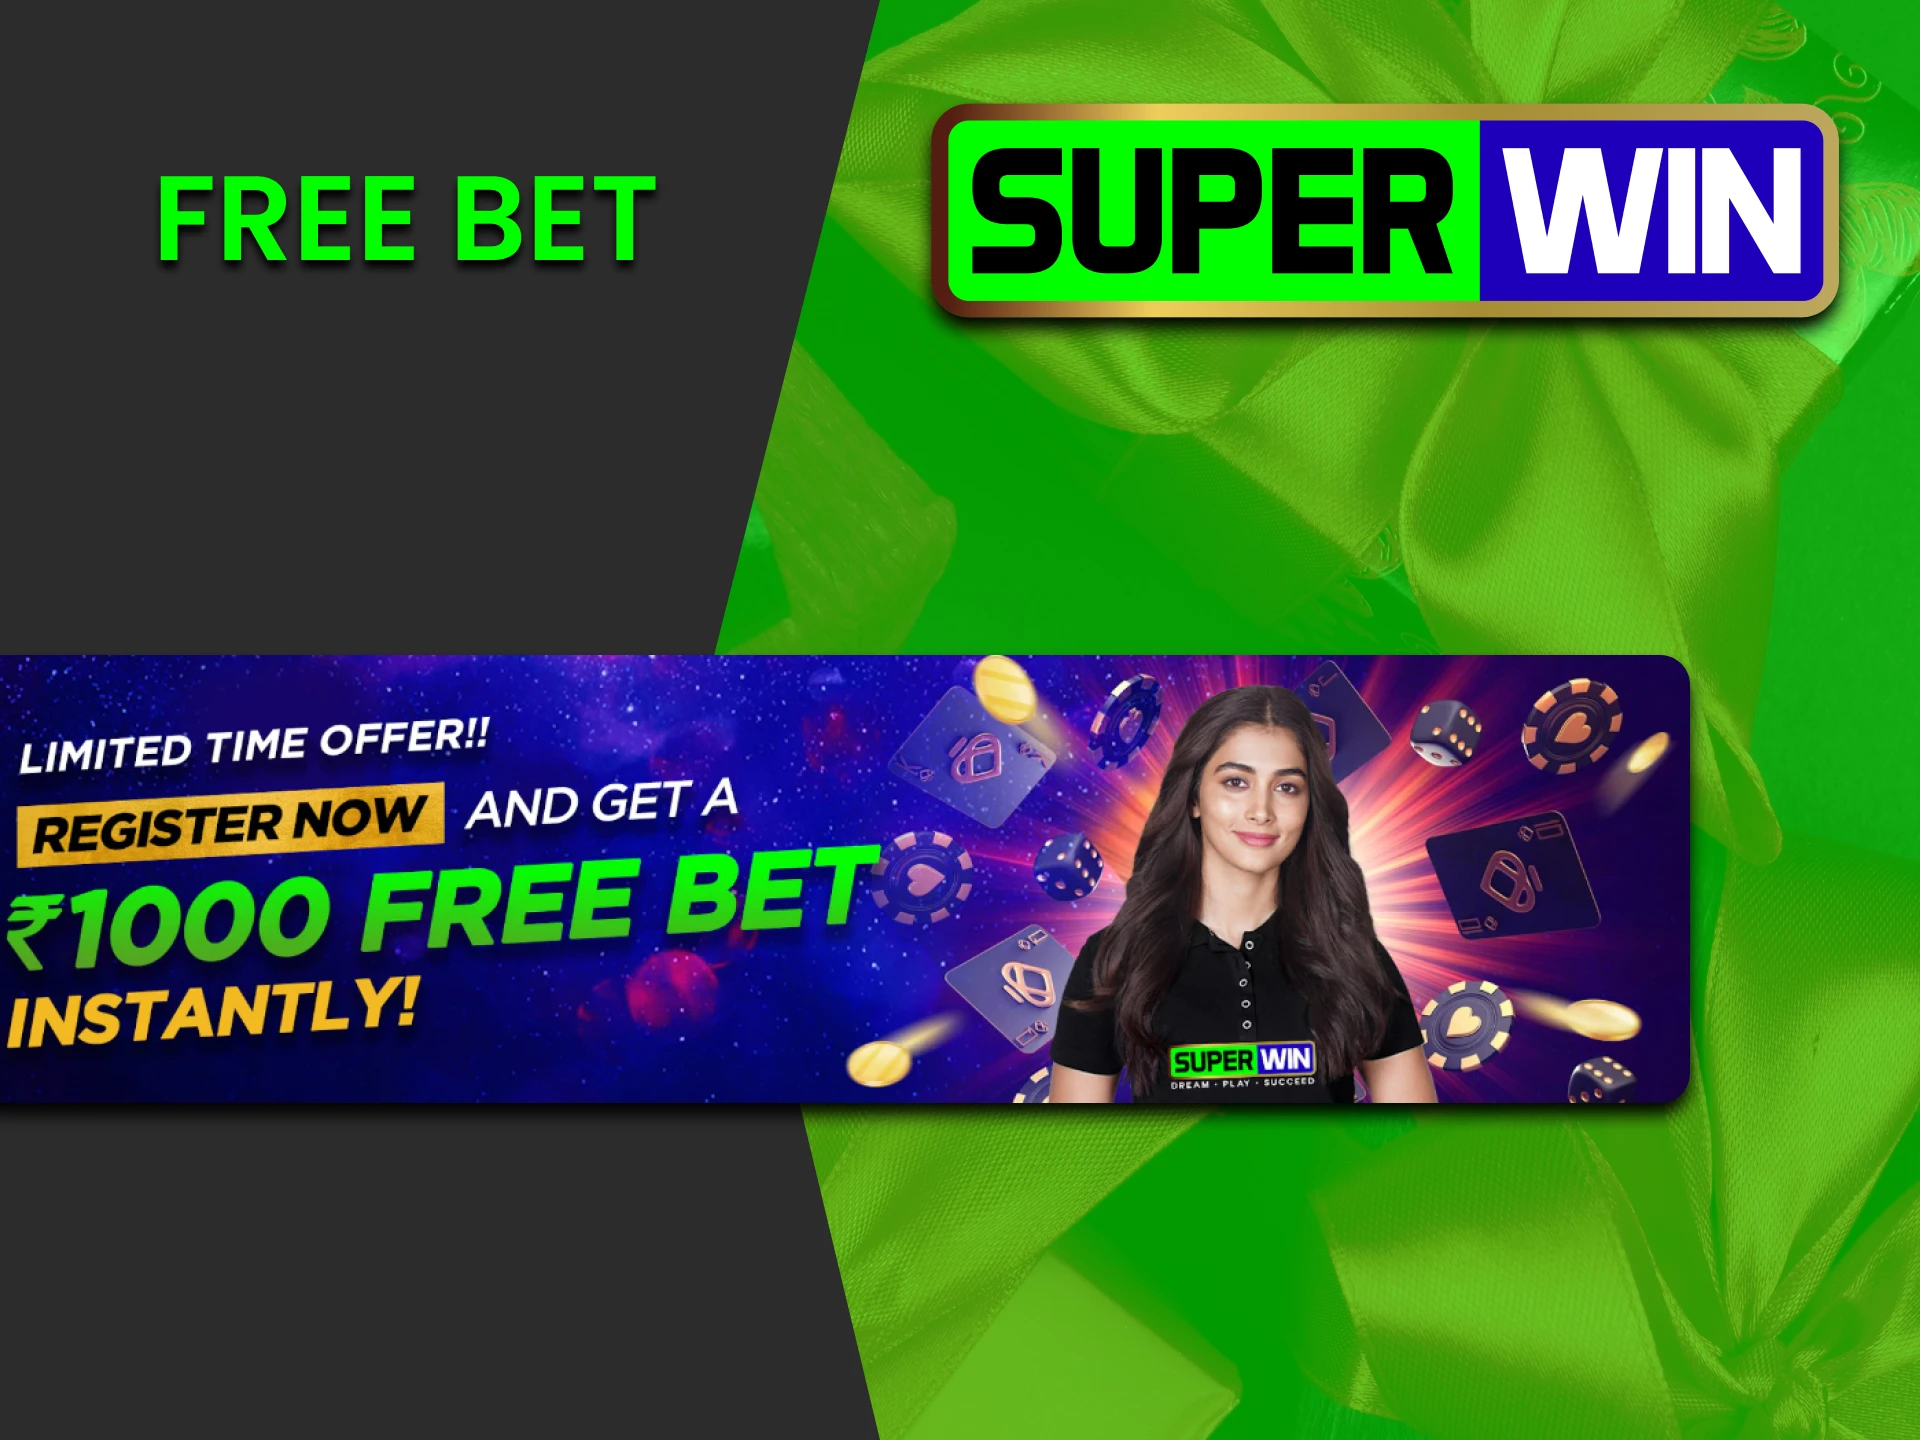 Get a bonus from Superwin for free bets.